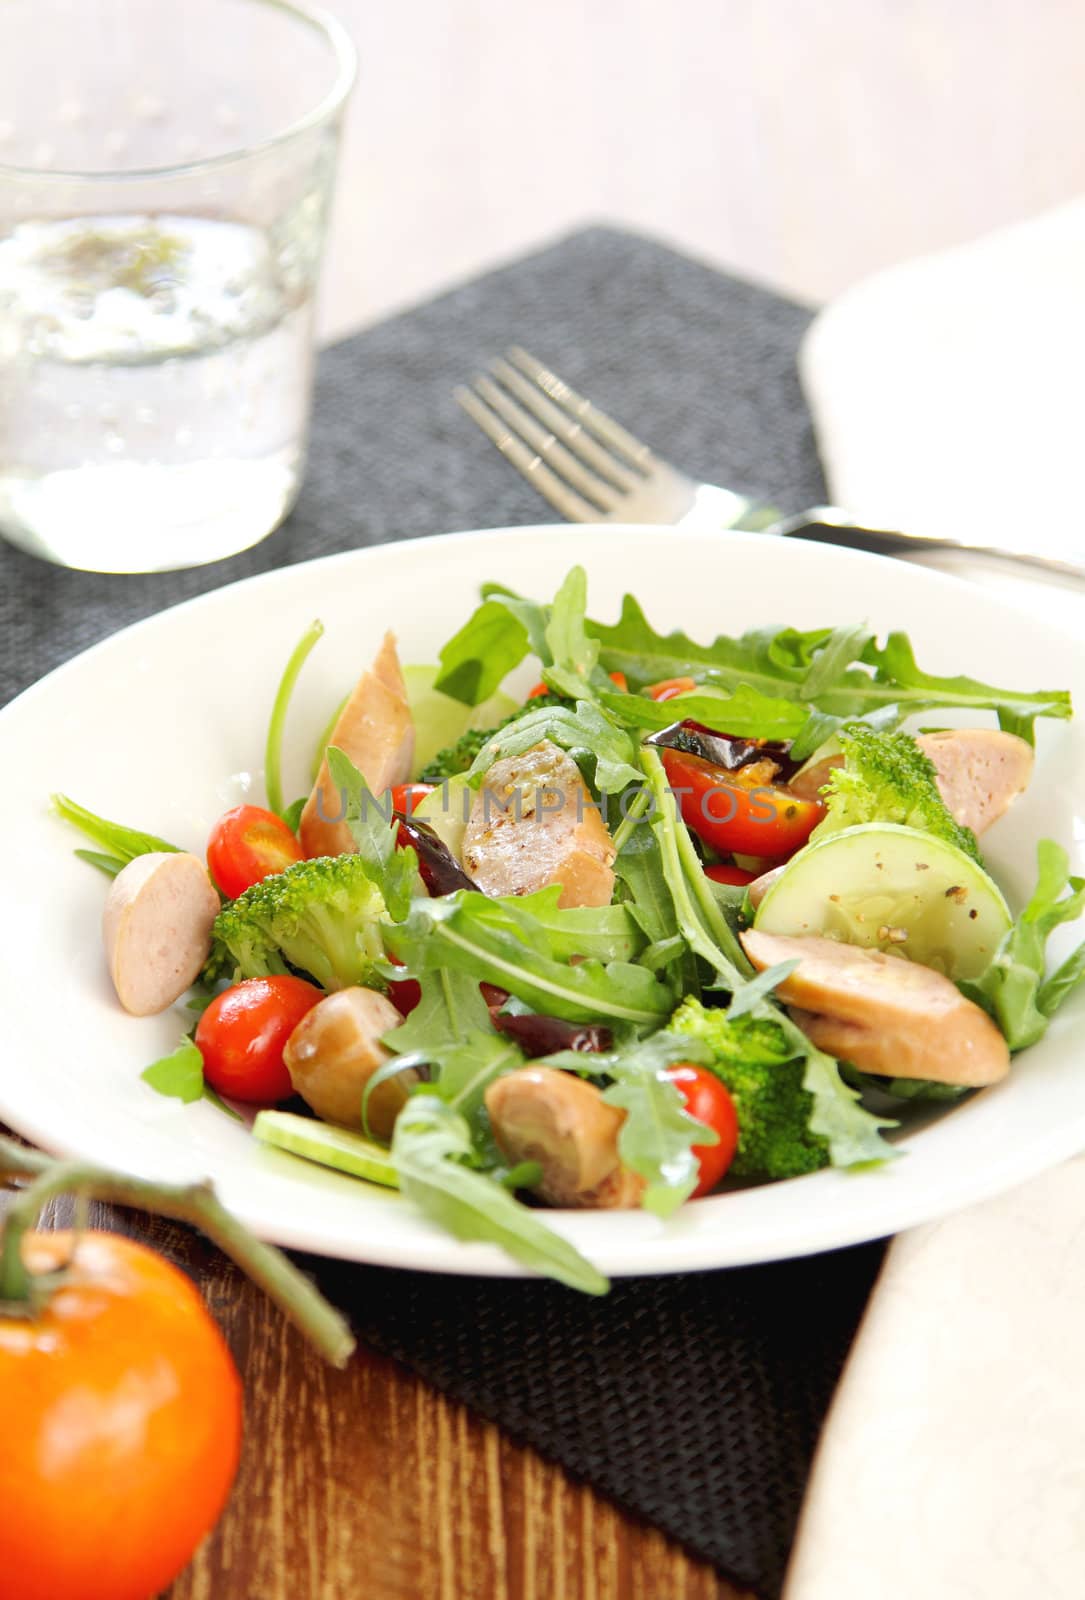 Cheese sausage and rocket salad by vanillaechoes